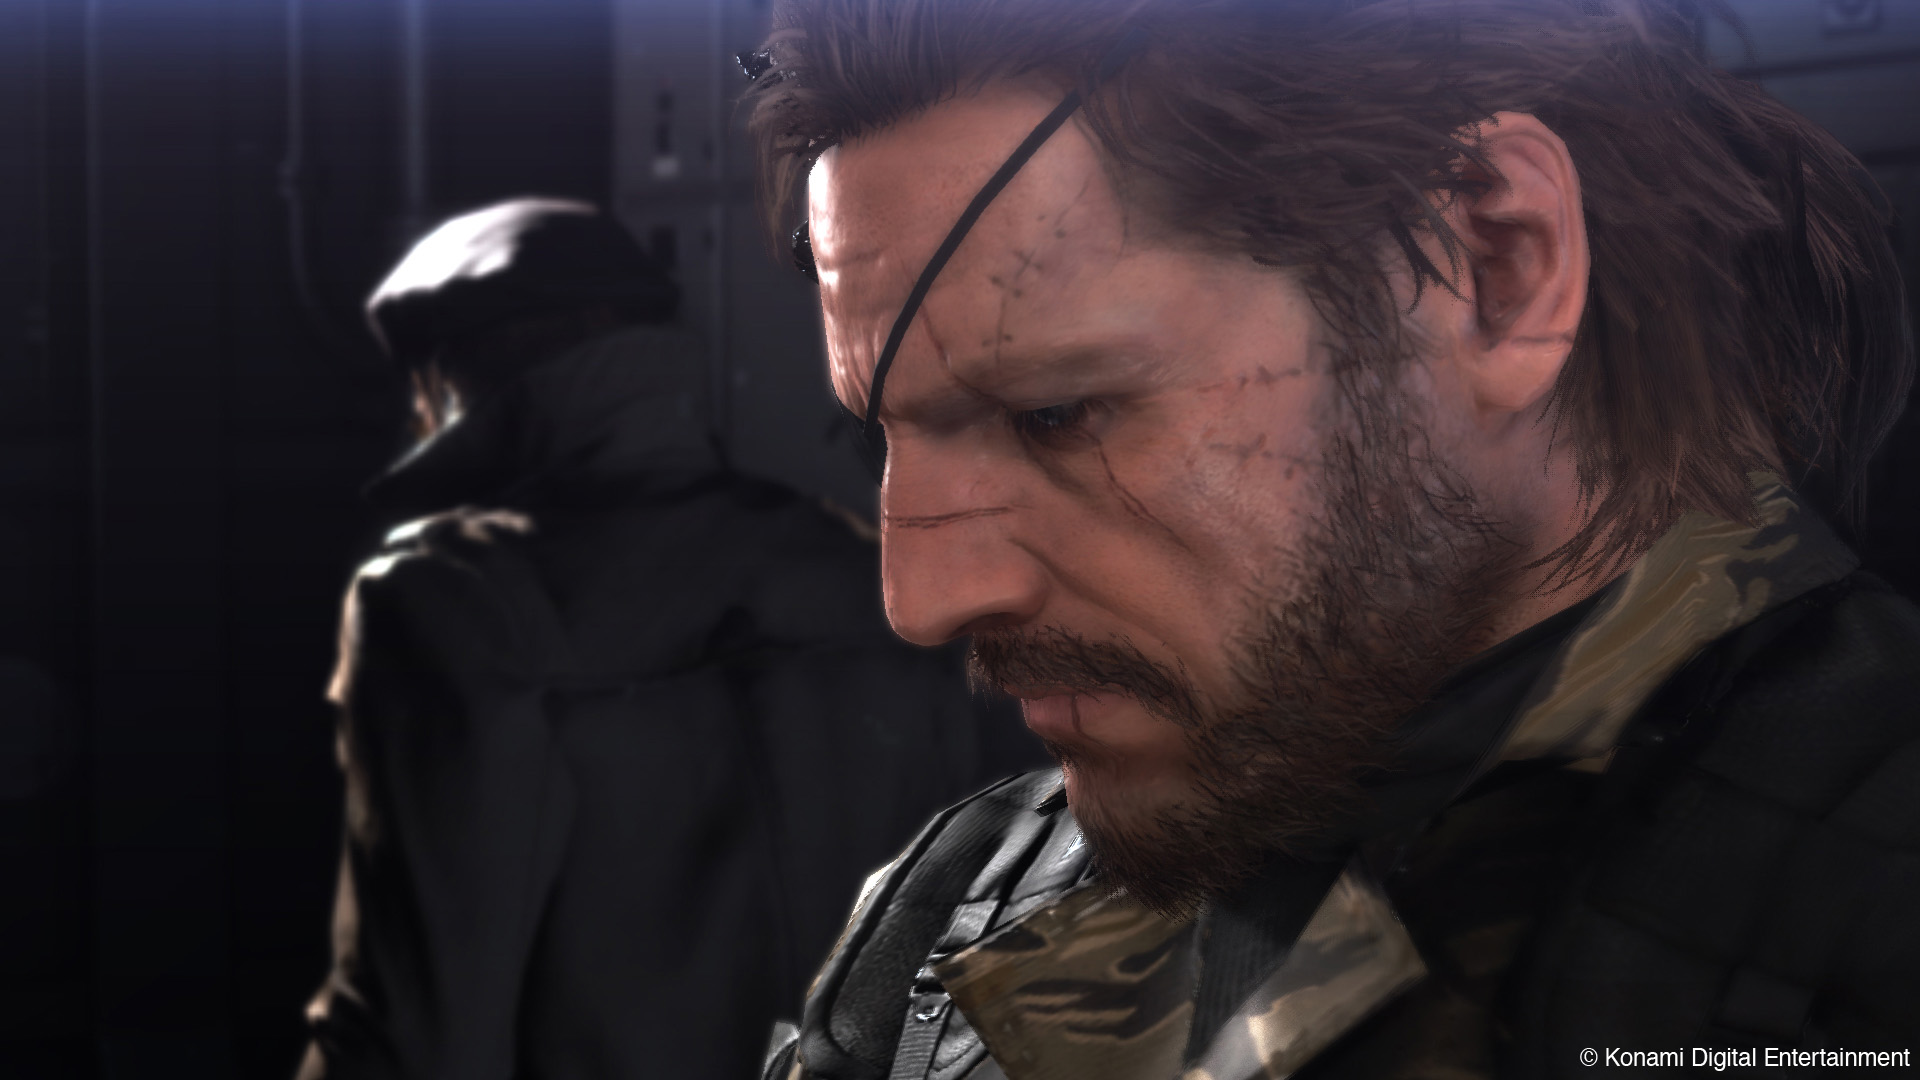 Have A Look At These New Metal Gear Solid Screenshots You Jaw Will